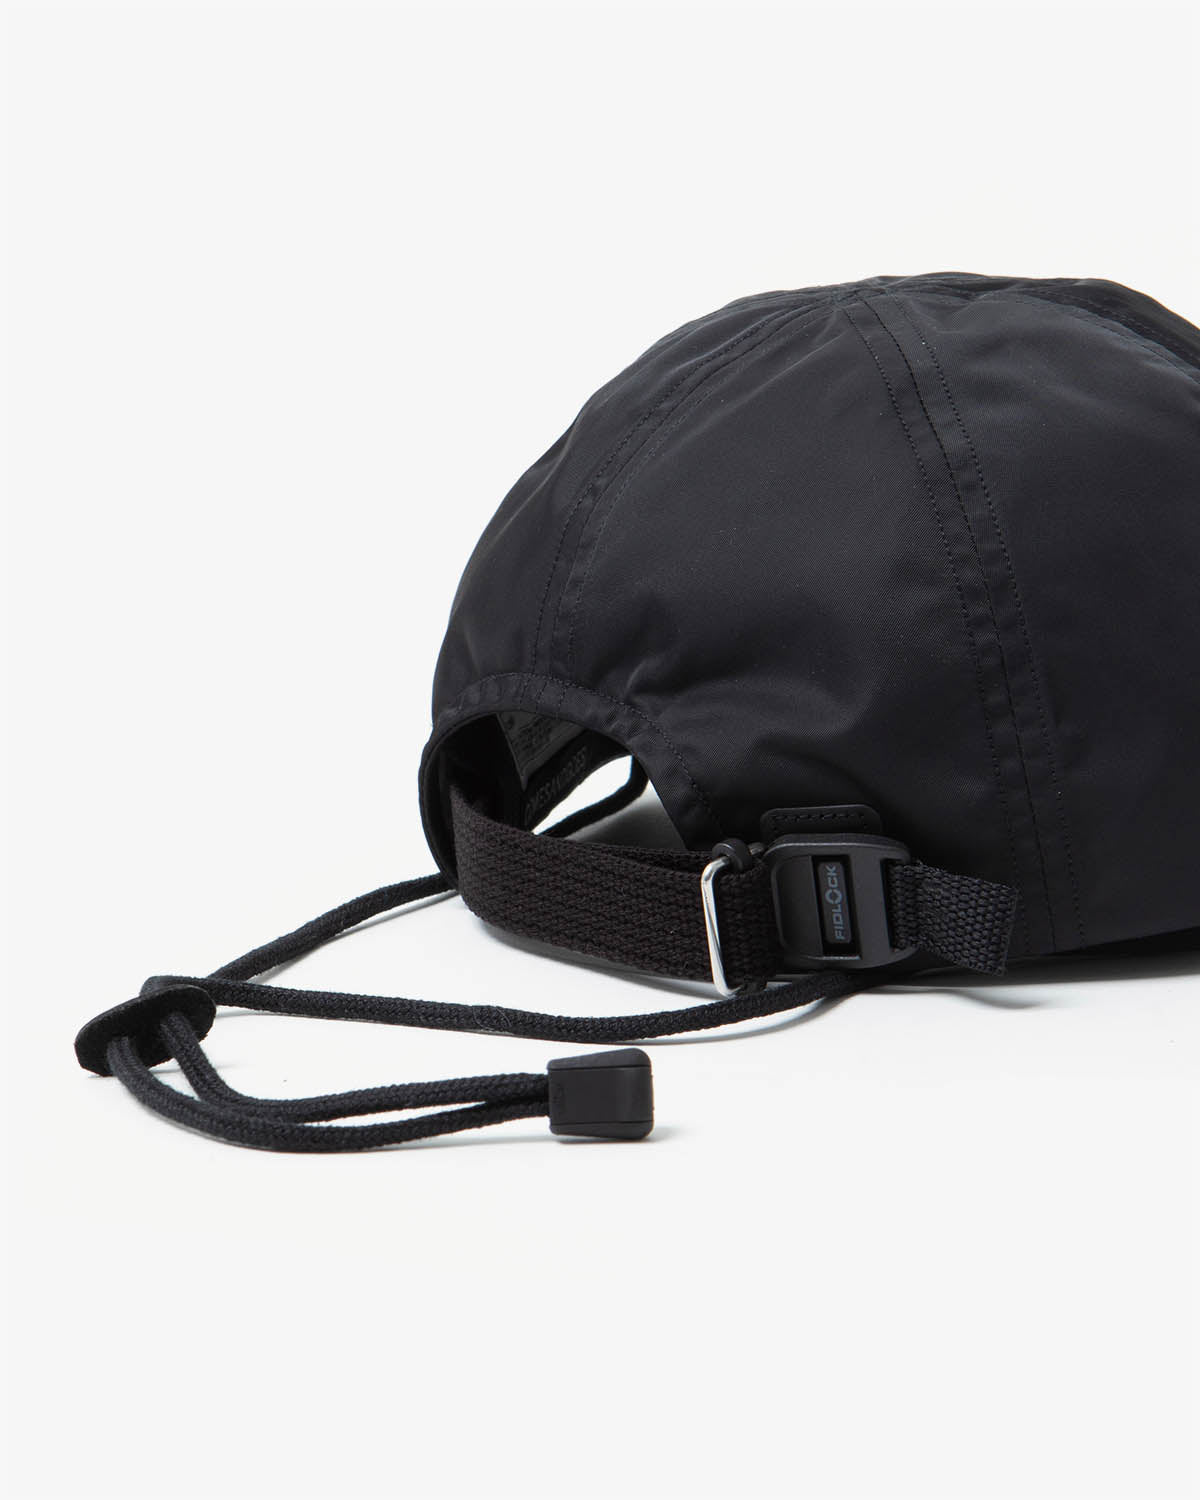 DICROS CAP (WITH CHIN STRAP )